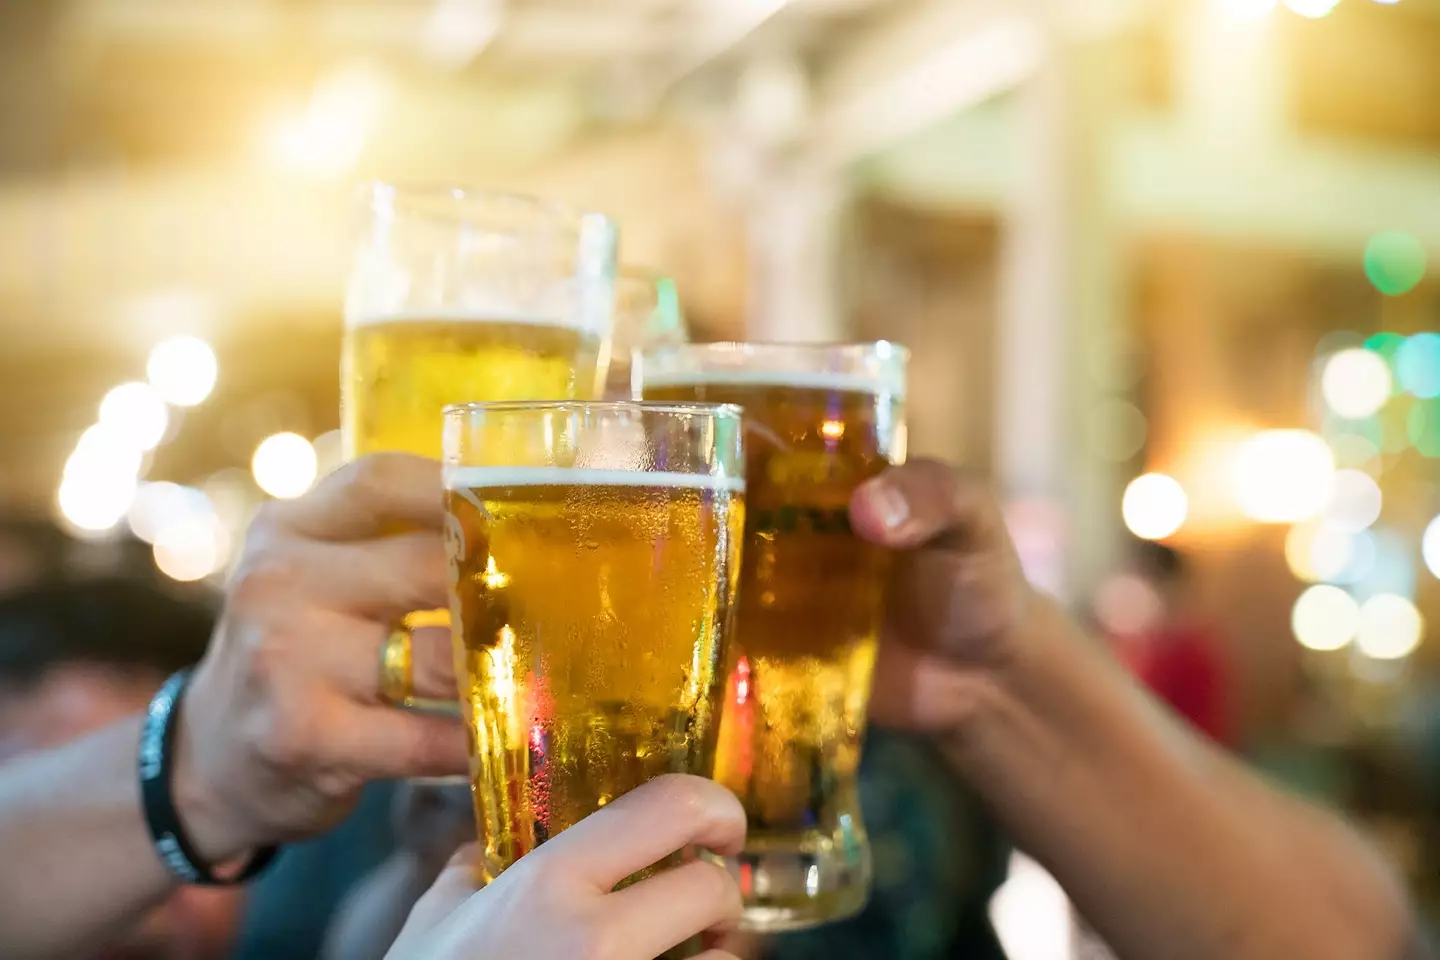 Getting a beer with your boss? Maybe it'd land you the job.